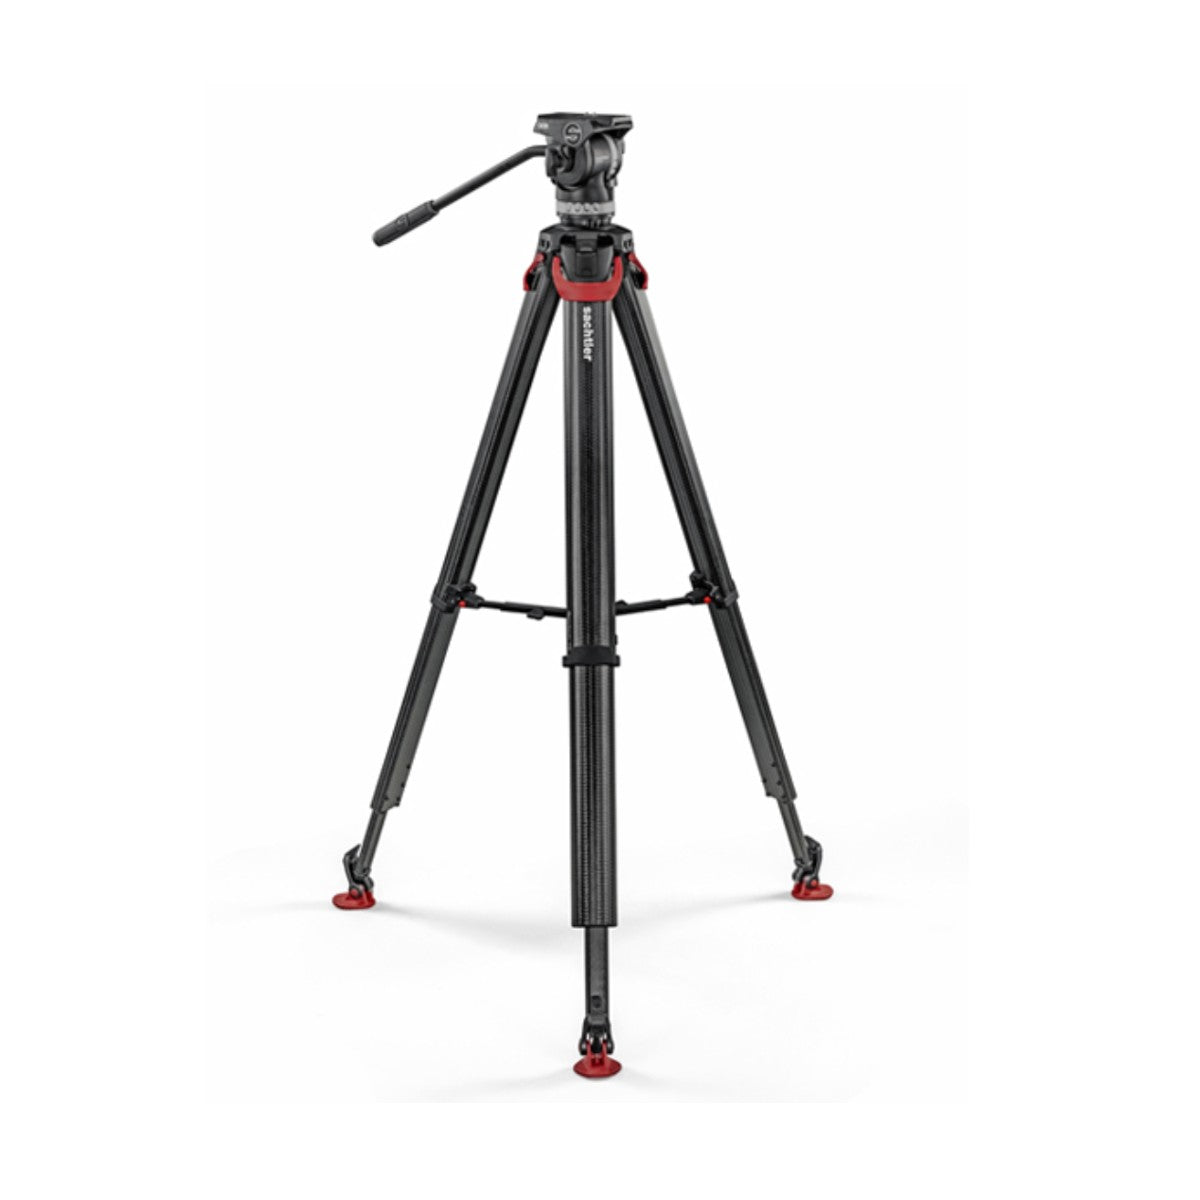 Sachtler ACE XL Tripod System with FT 75 Legs & MLSpreader (75mm Bowl)